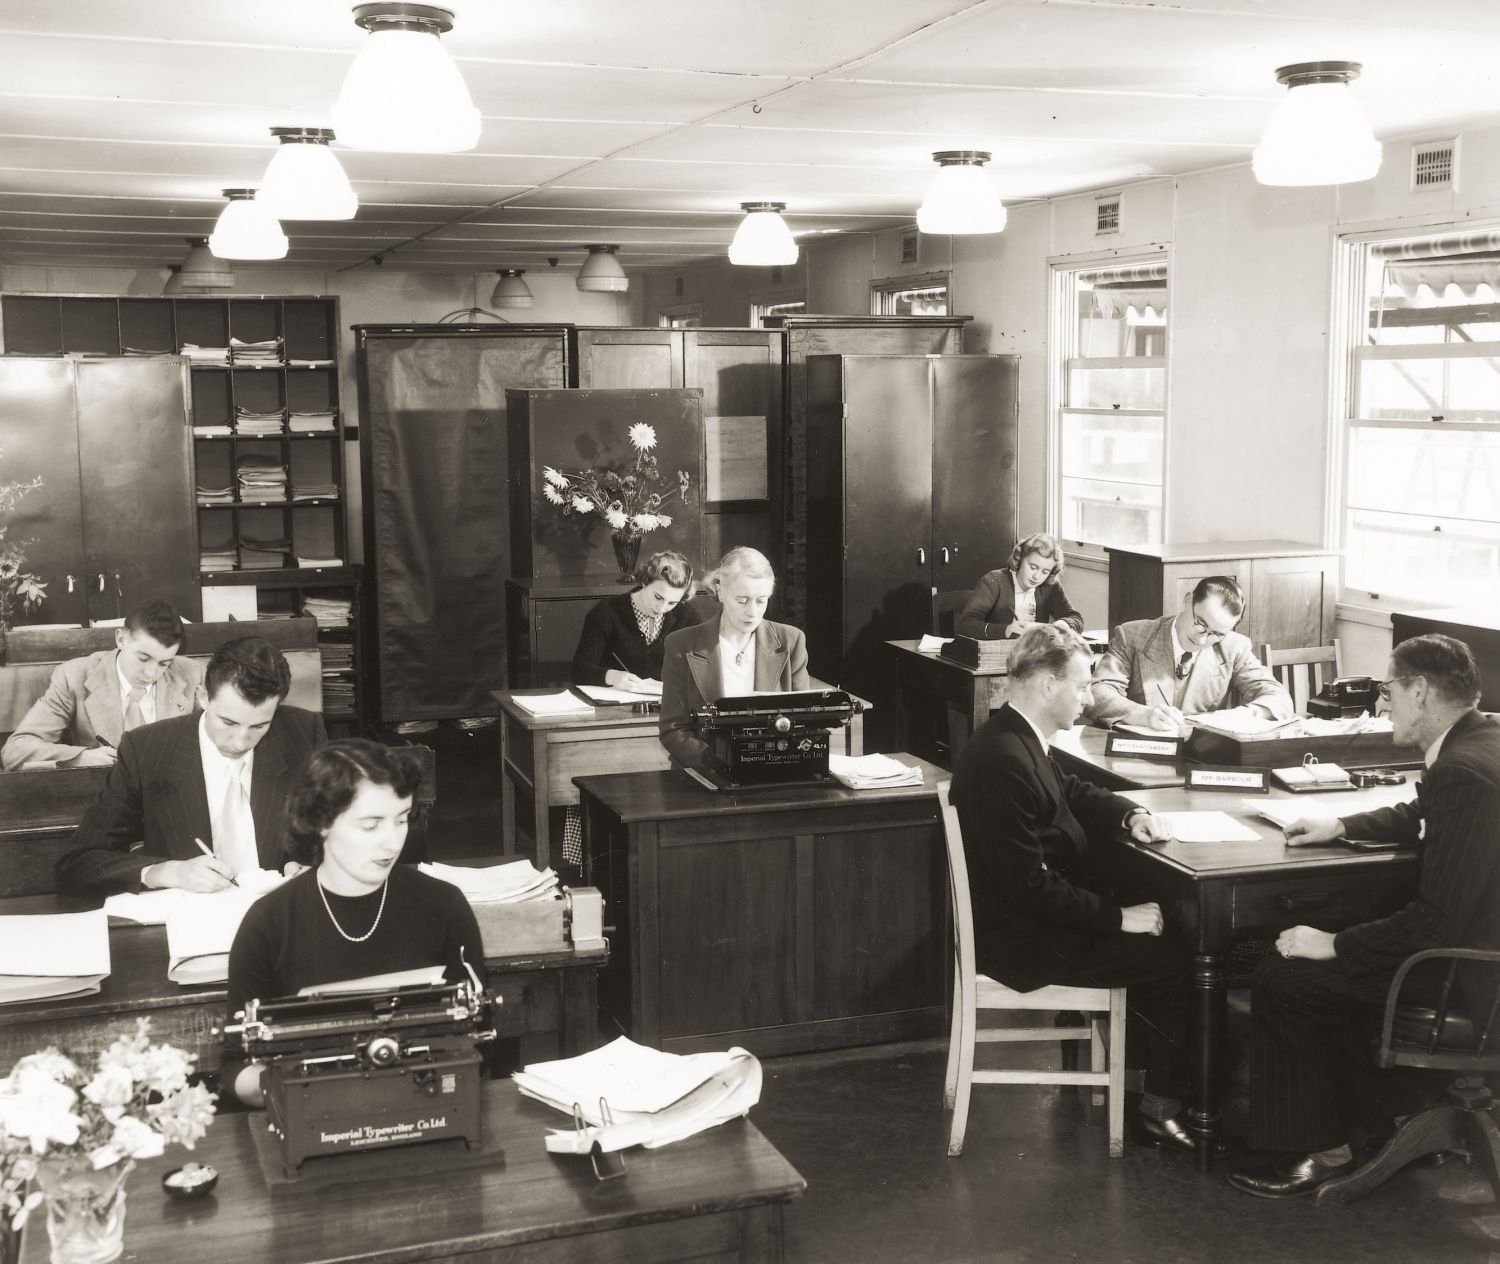 Black and white photo of a grou of people sitting at desks with type writers